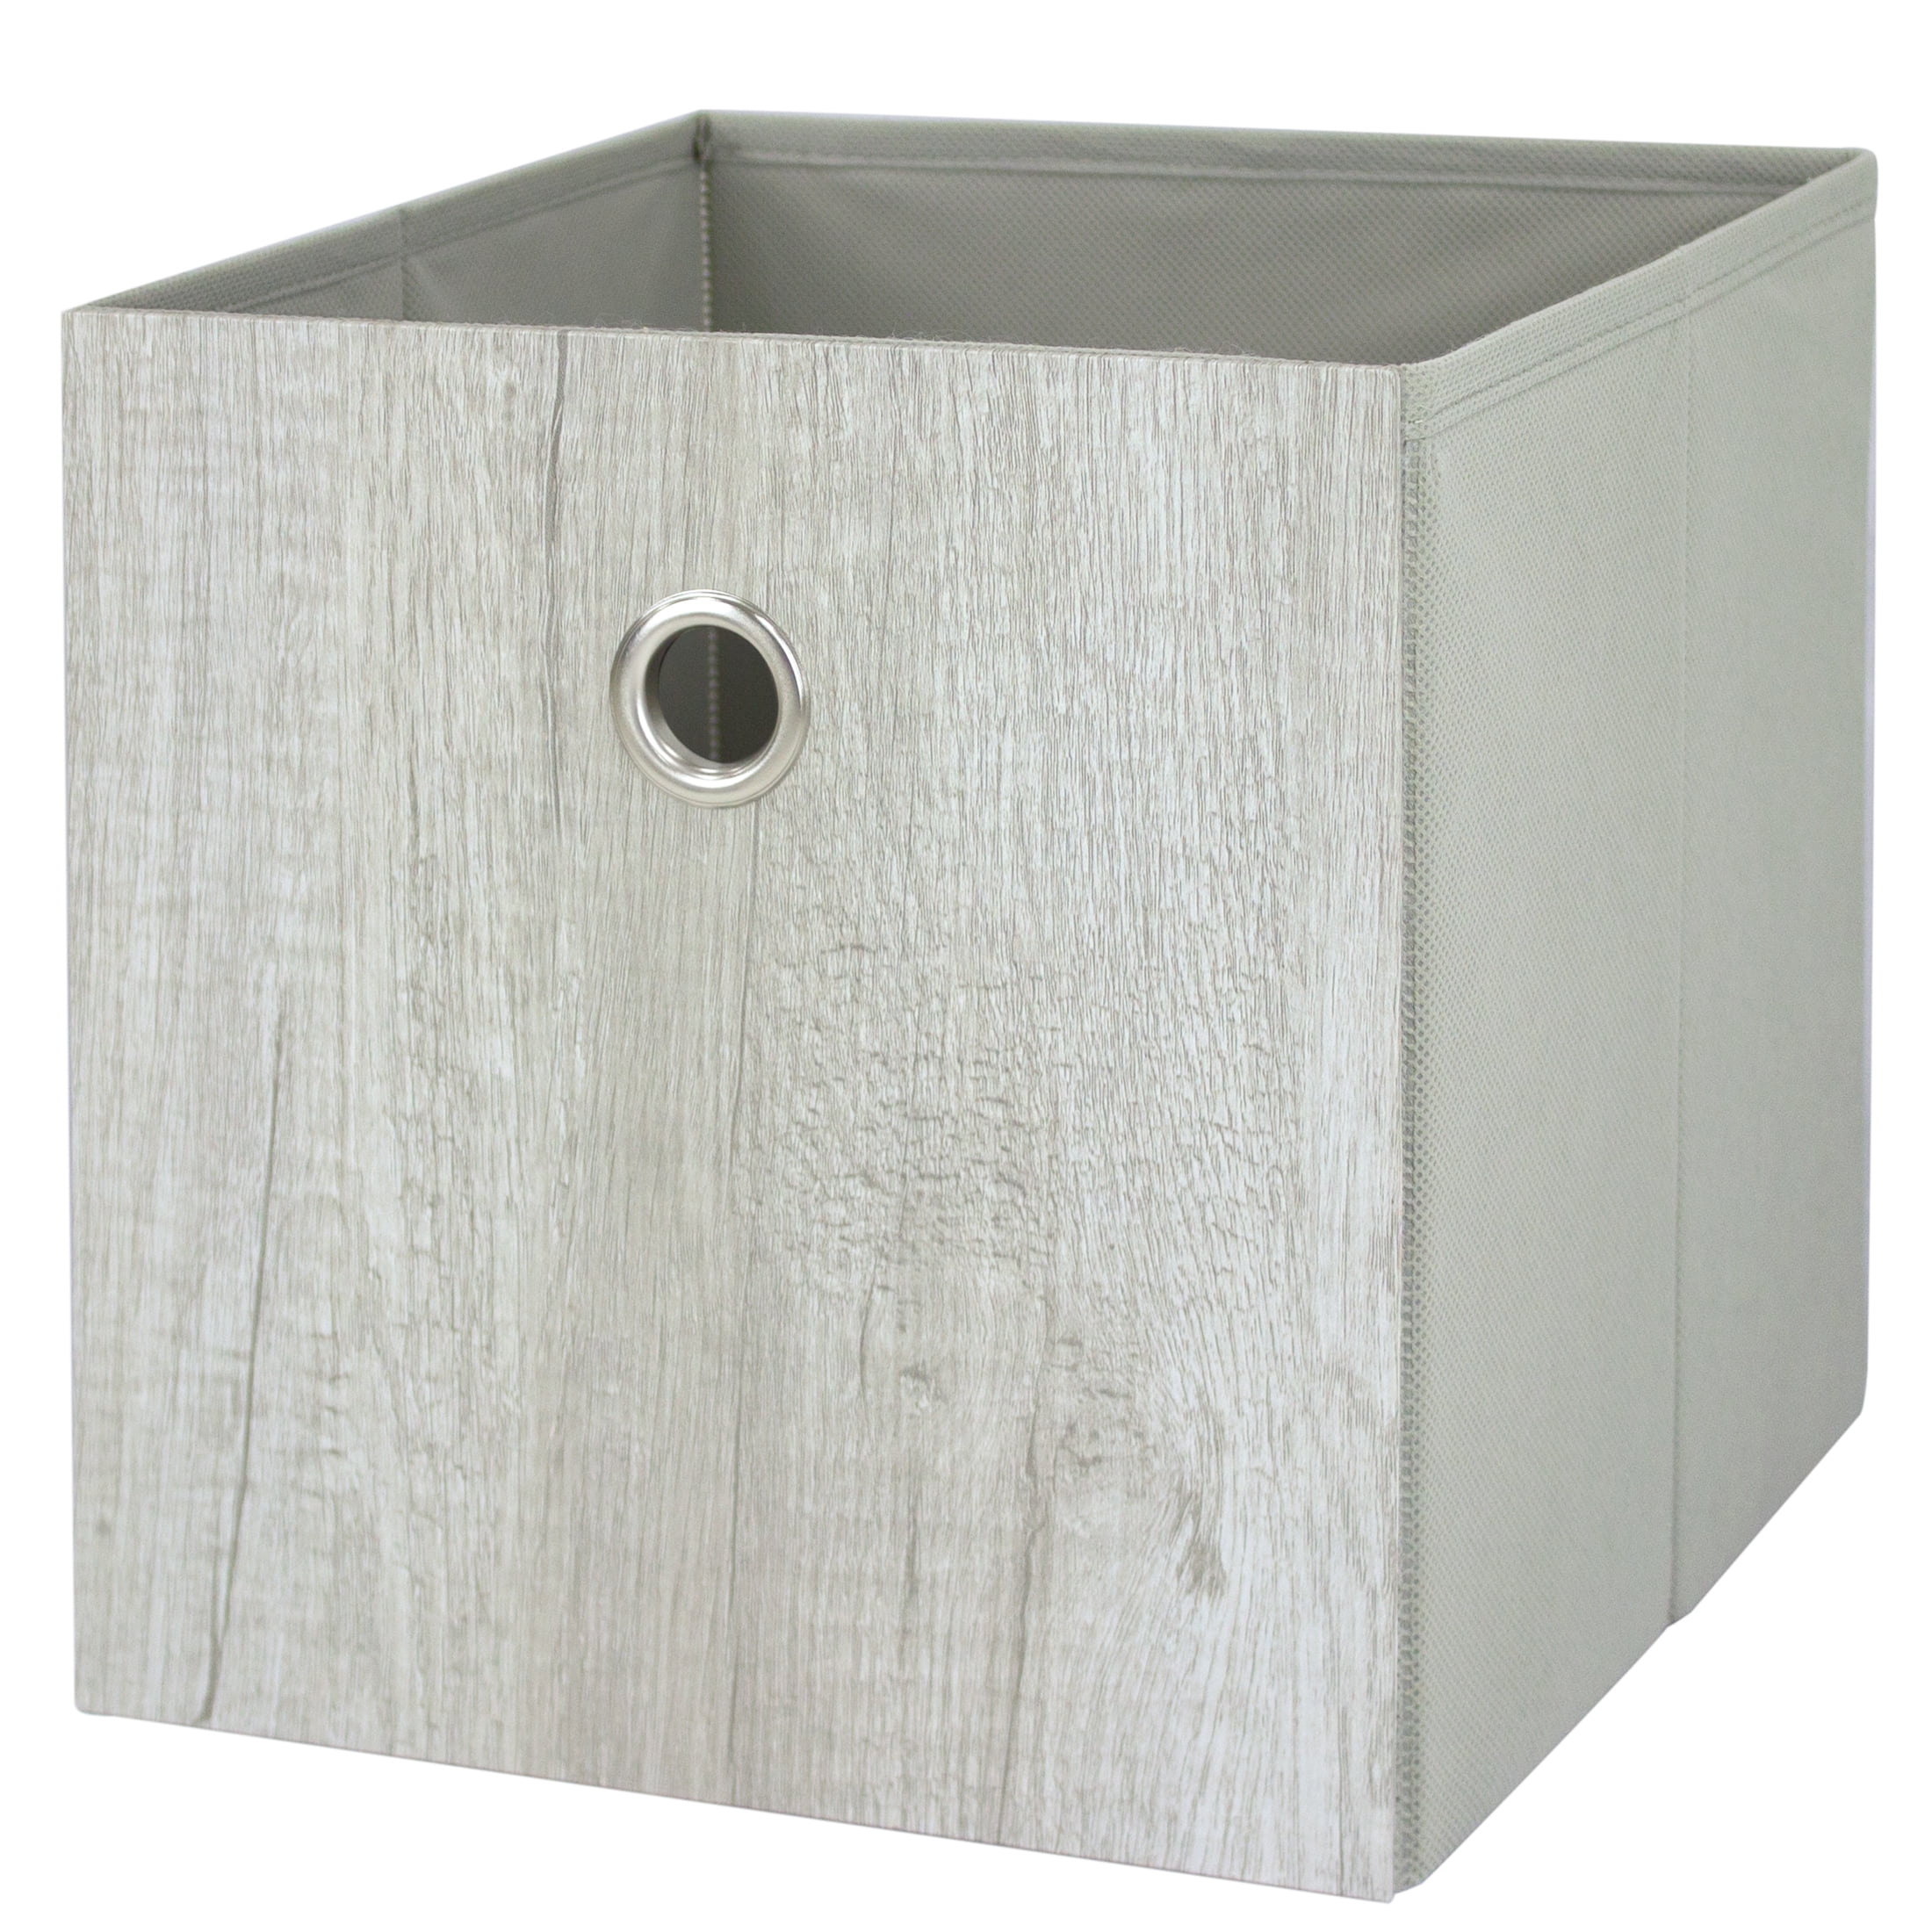 Mainstays Collapsible Fabric Cube Storage Bin - Grey Wood Grain - 10.5 x 10.5 in